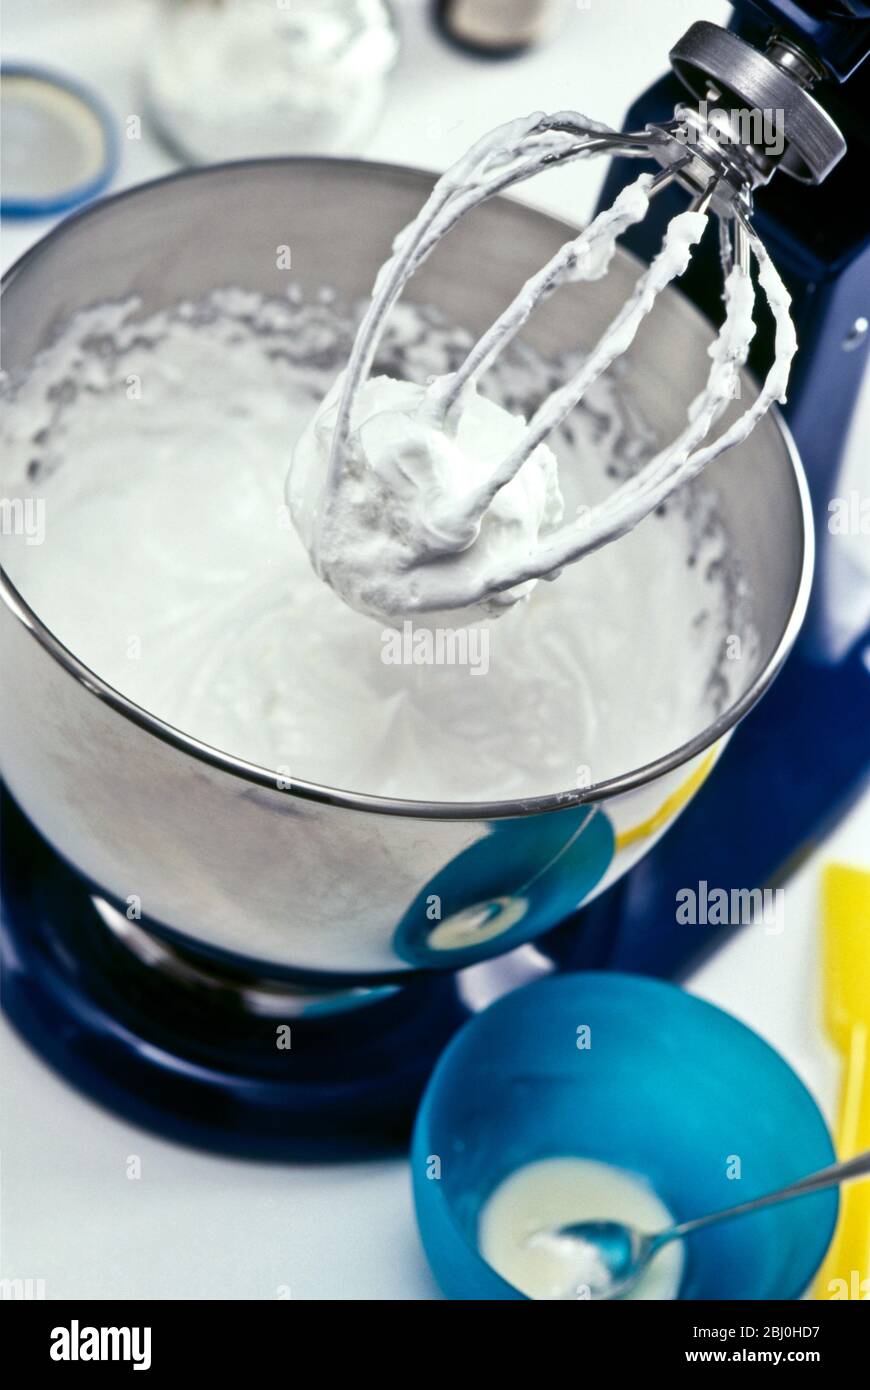 Beaten egg white in stainless steel mixer in kitchen setting, showing stiffness of the egg whites - Stock Photo